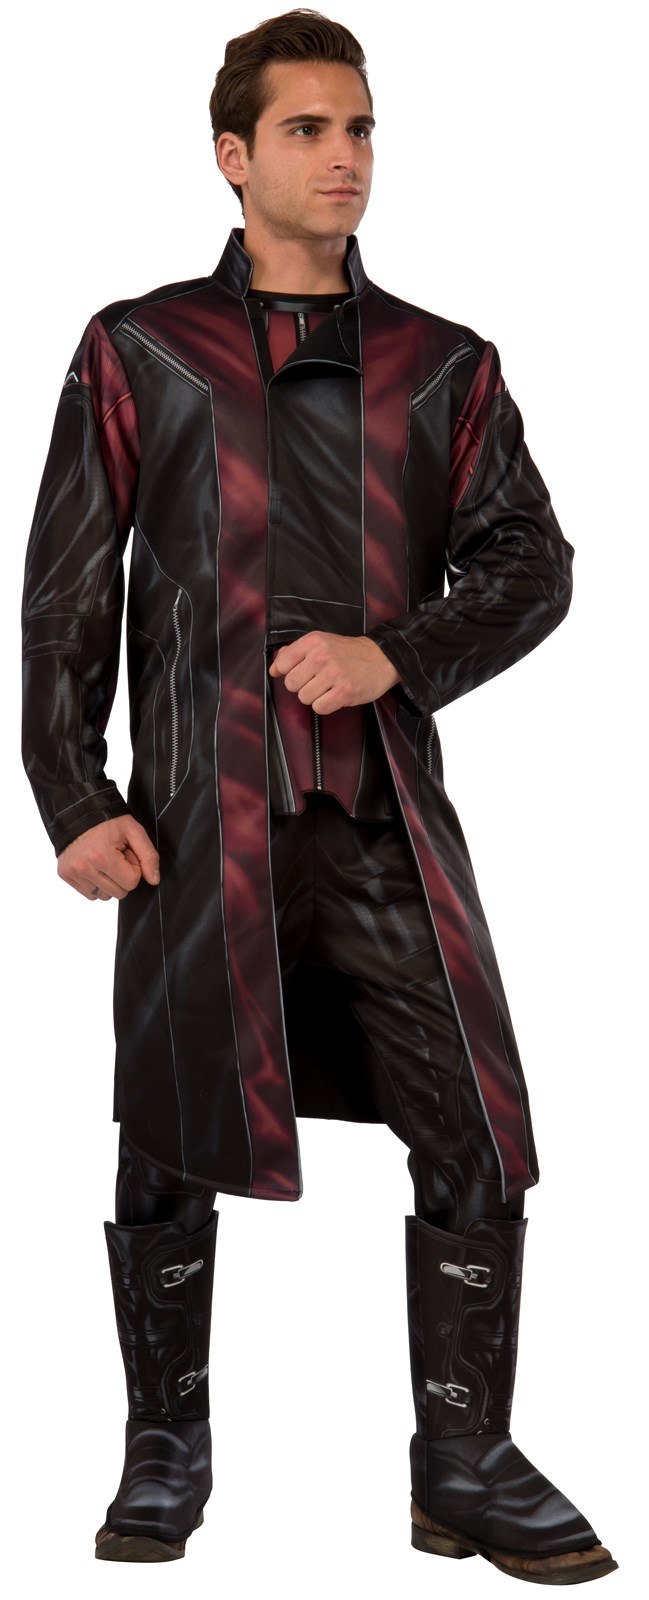 Avengers 2 – Age of Ultron: Deluxe Hawkeye Costume For Adults